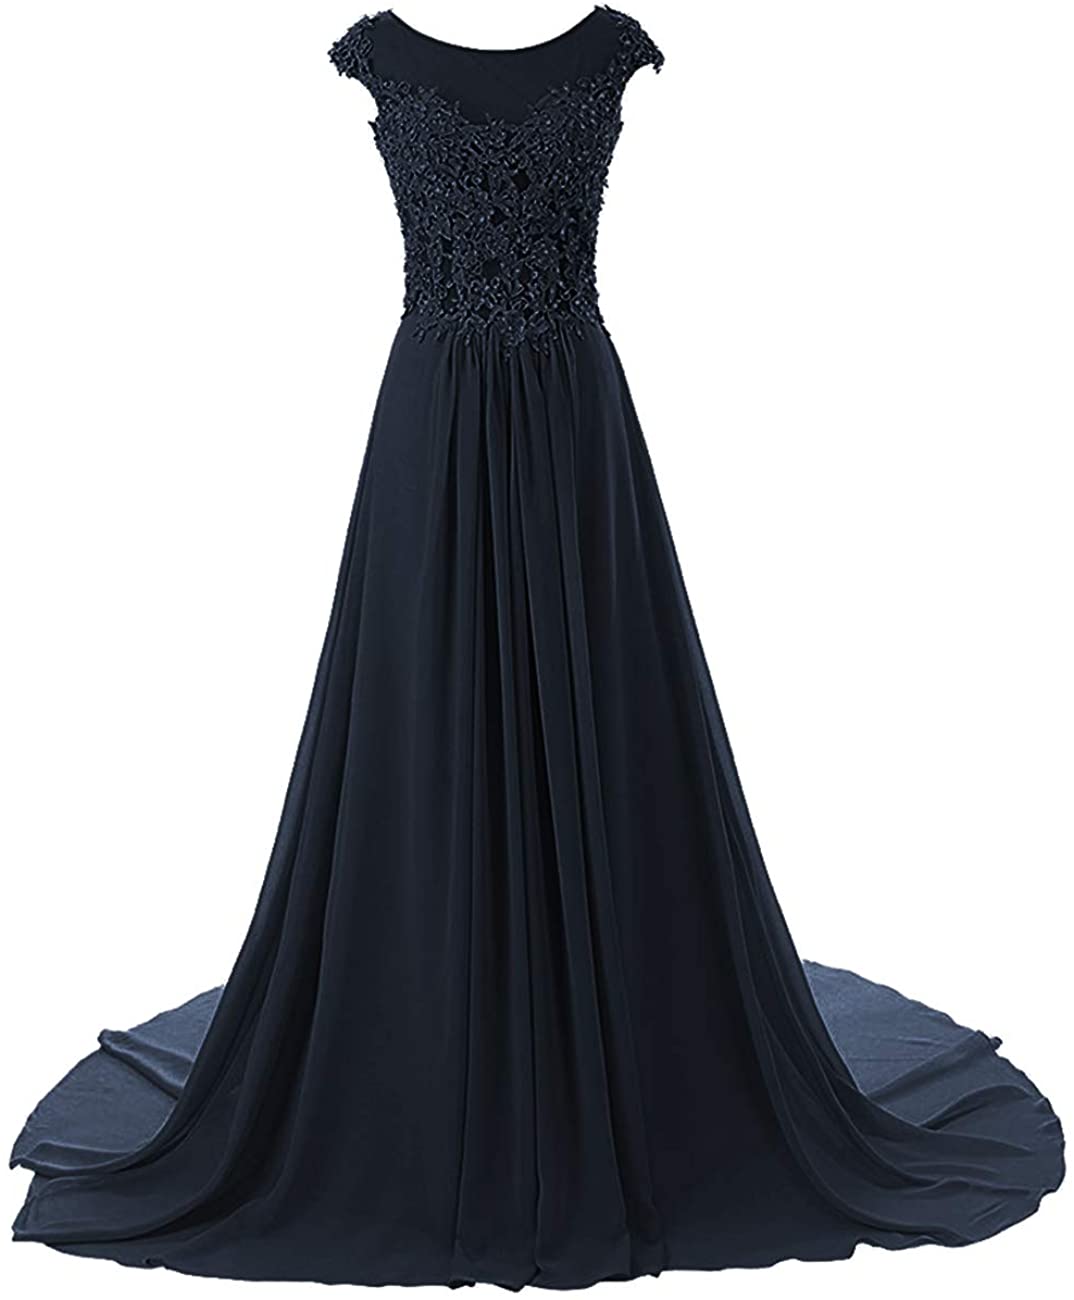 New Chiffon Formal Evening Bridesmaid Dresses Party Ball Prom Gown Dress 6-26 